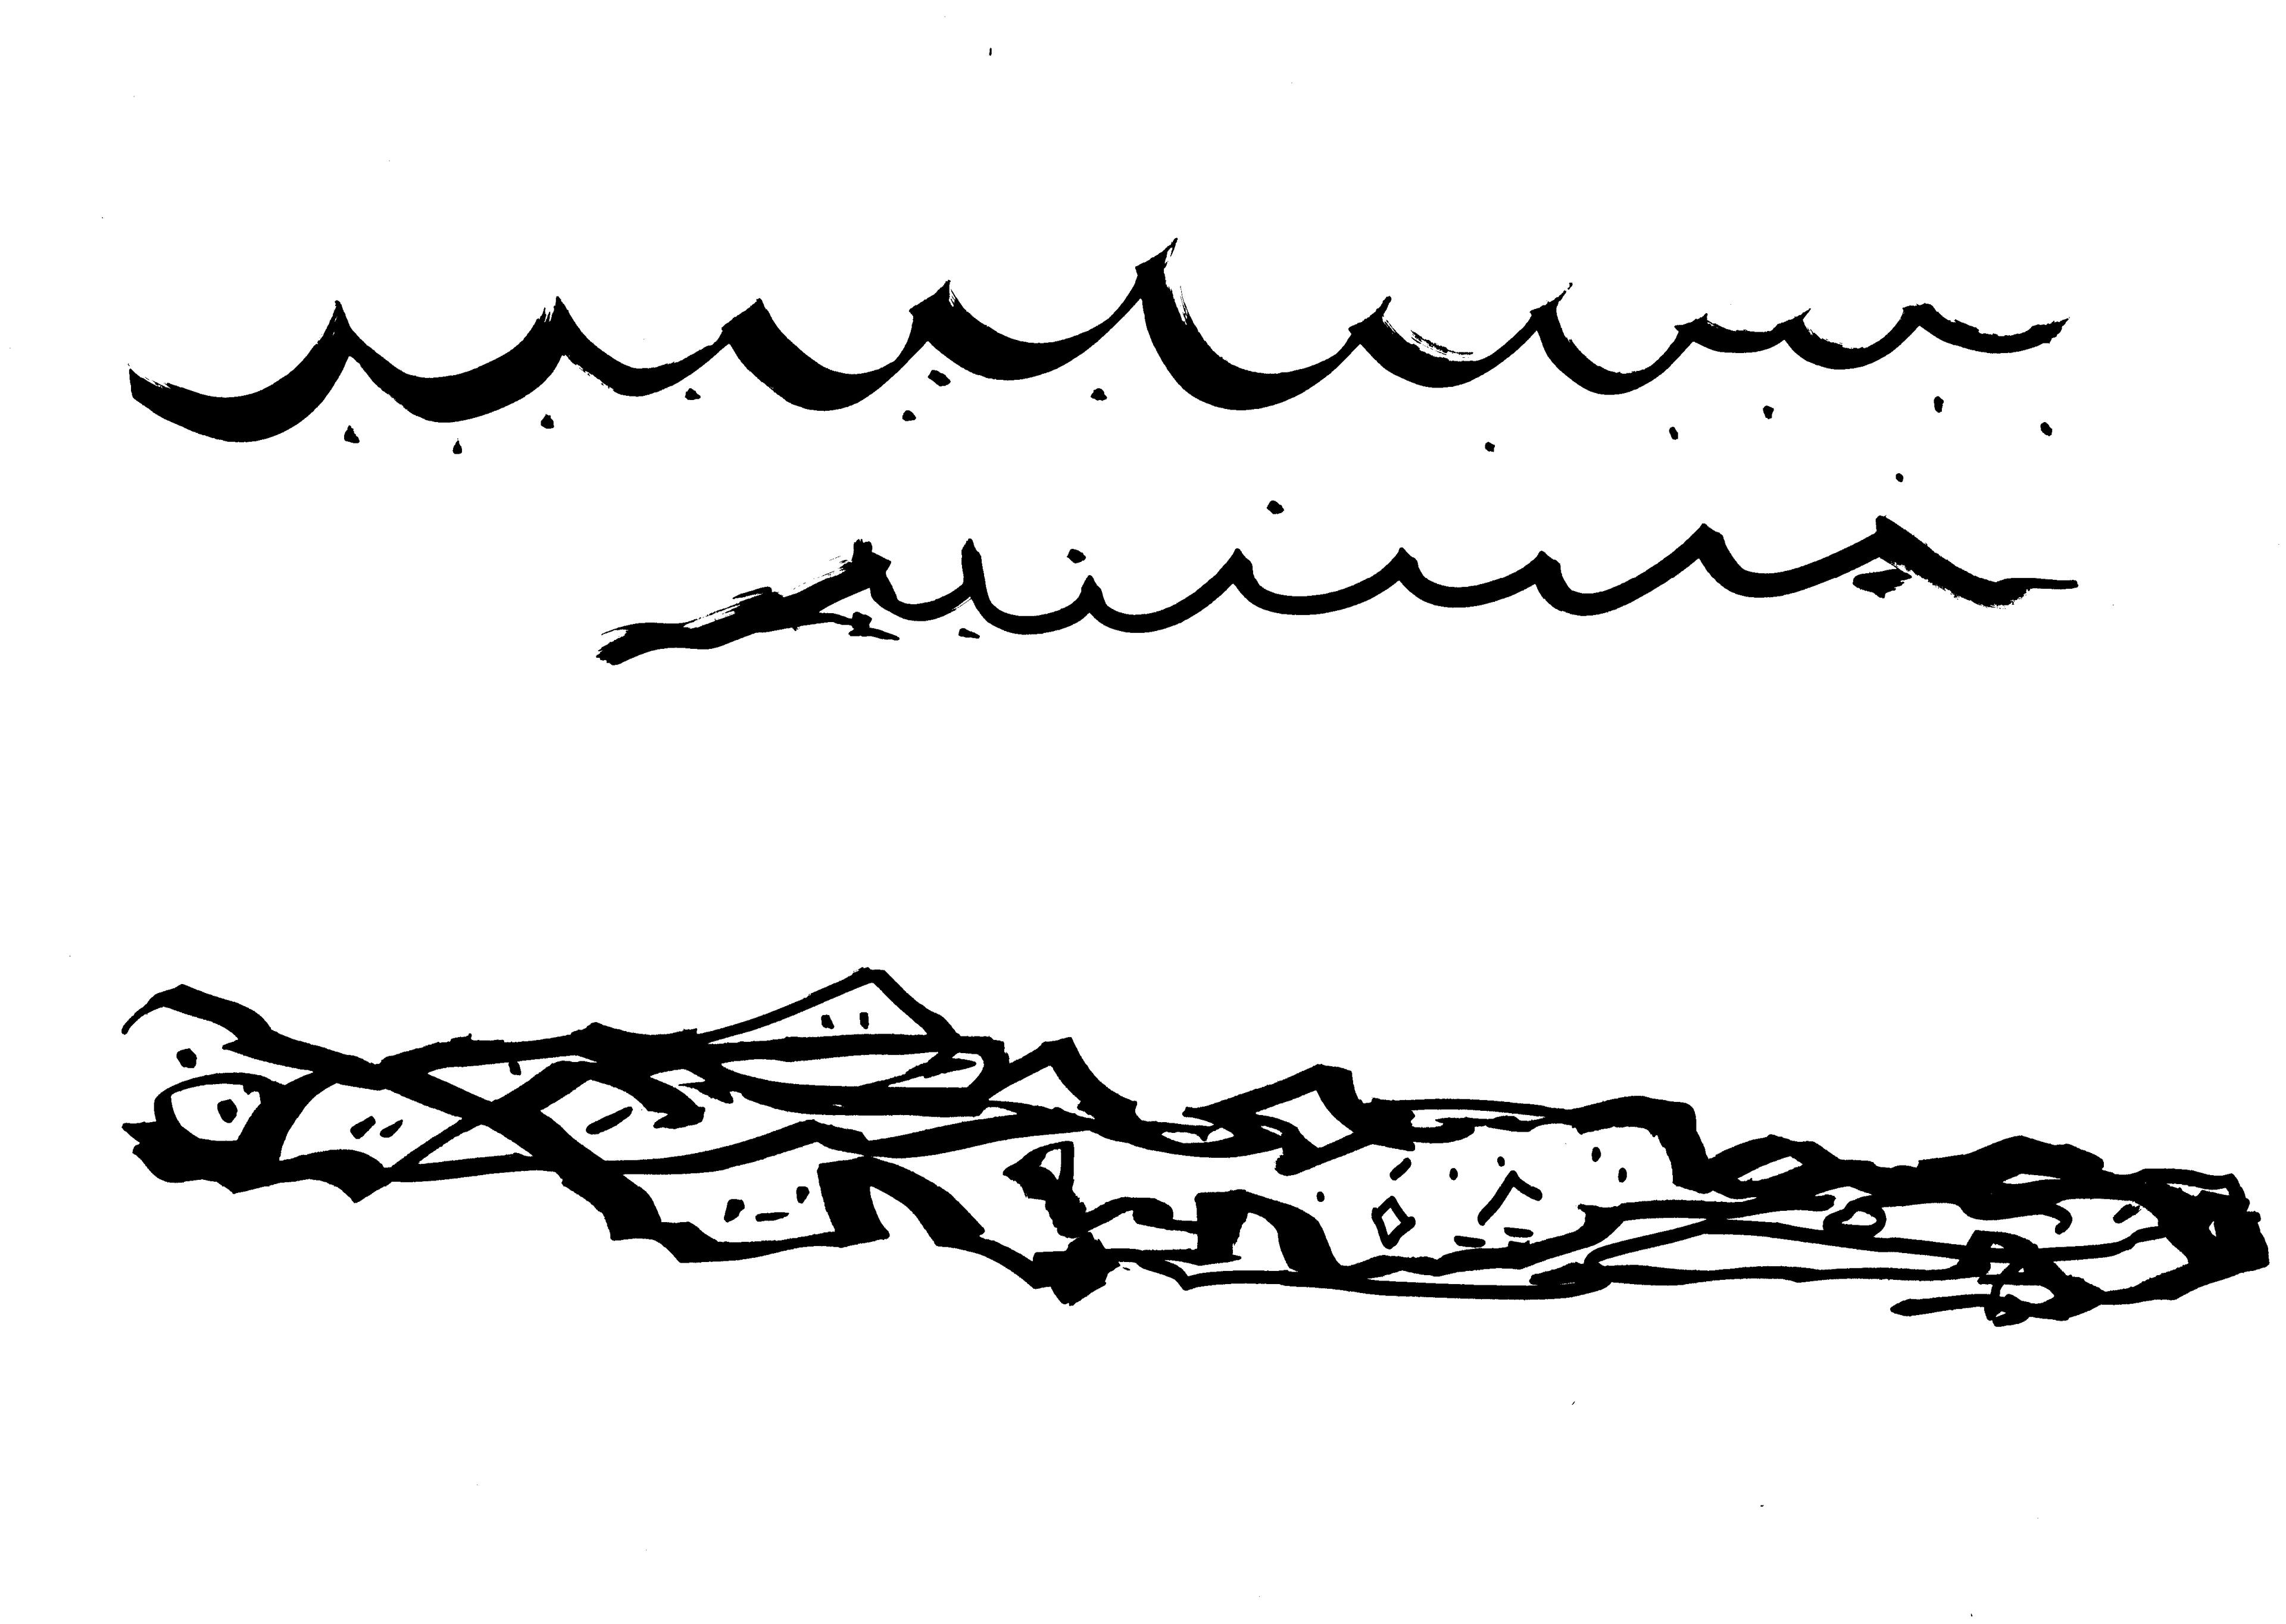 drawing by Wapke Feenstra for "Der vertikale Erdkilometer" animation - made for Lumbung documenta fifteen - to show the geological layers of Kassel